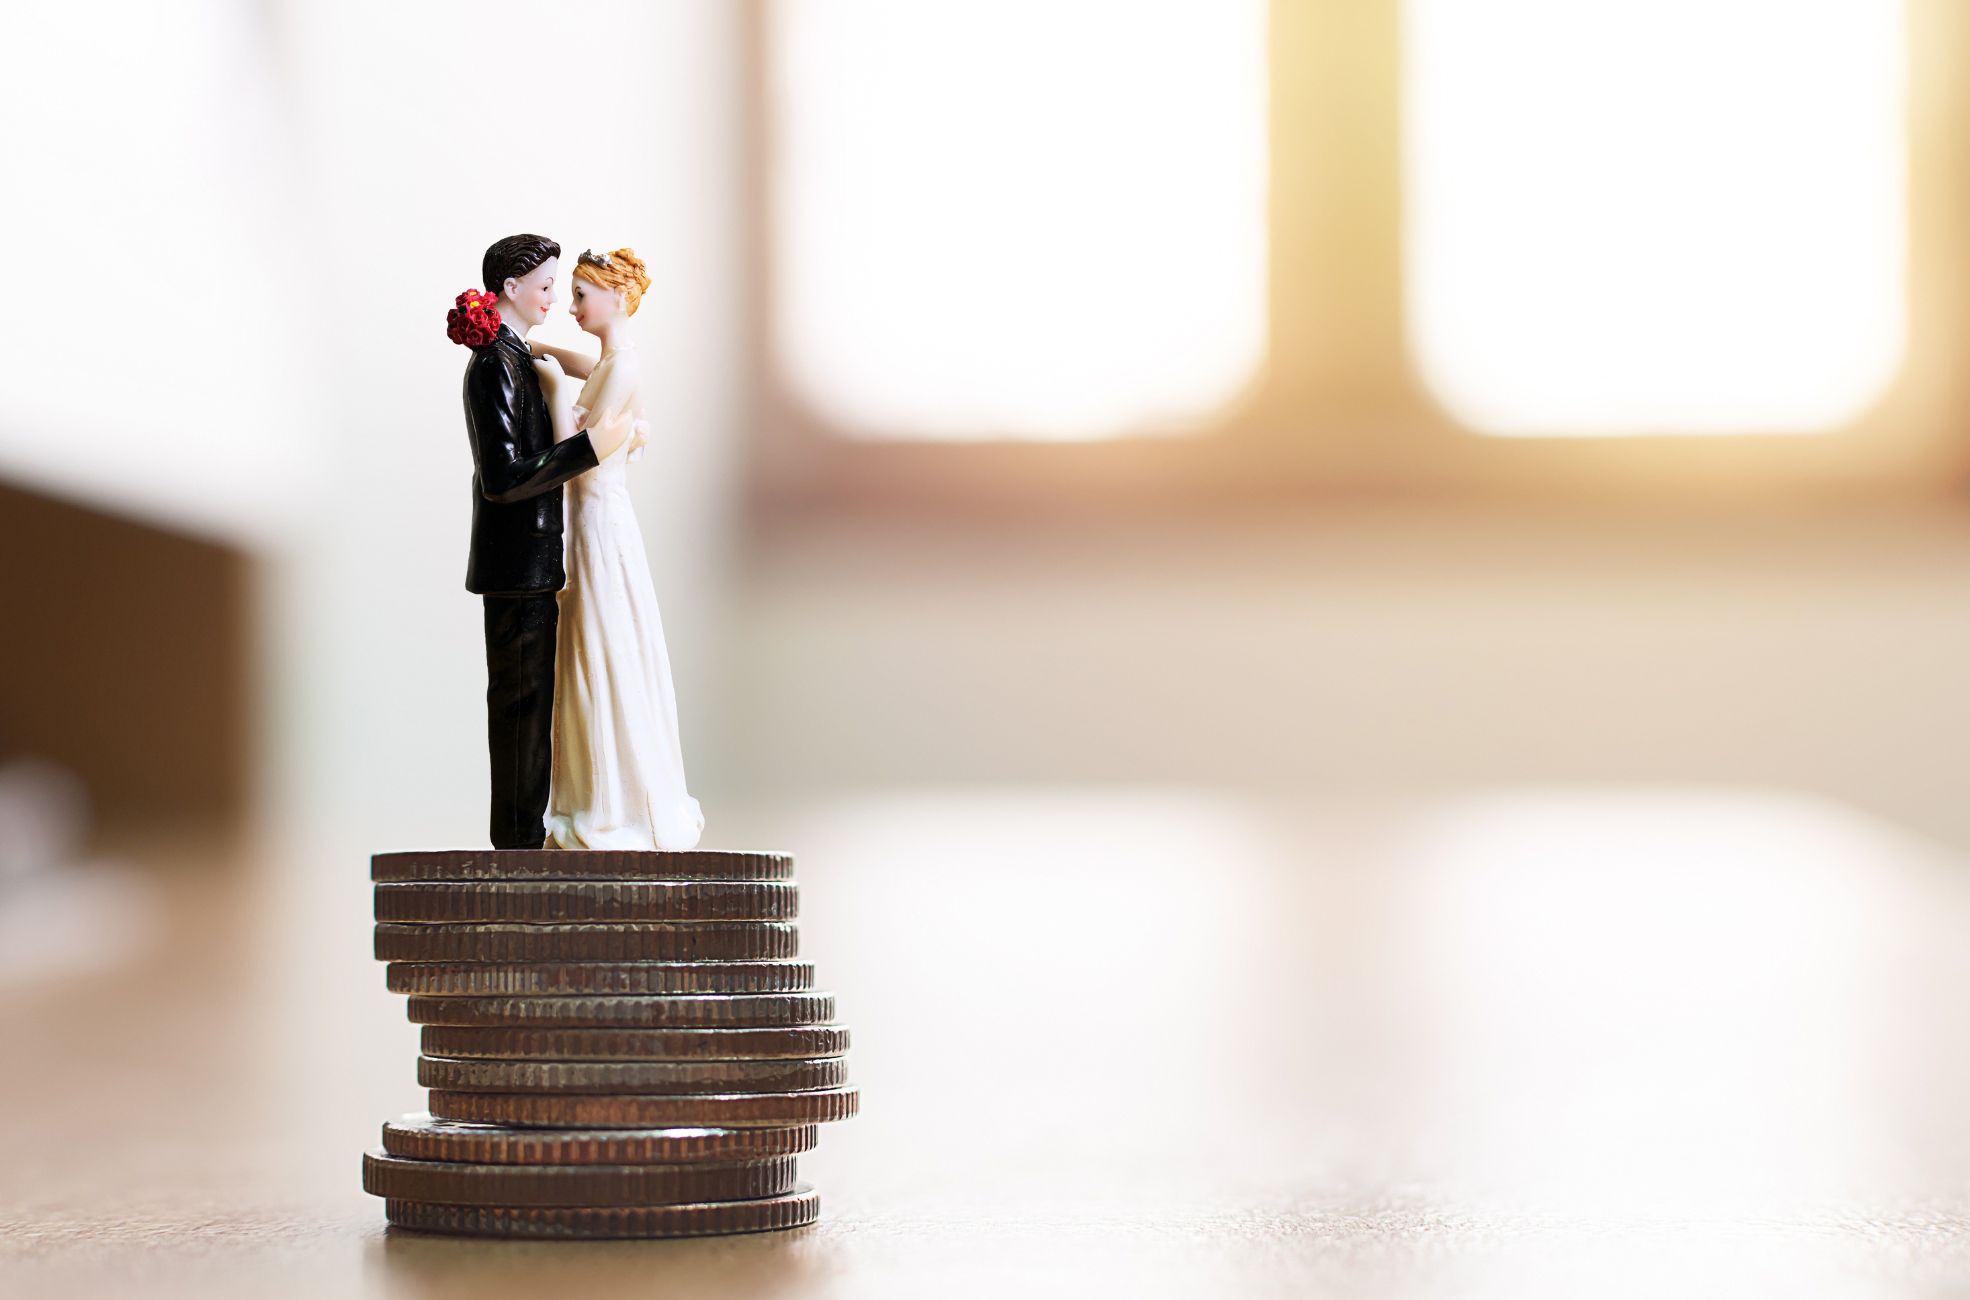 Wedding Cake Topper On Coins